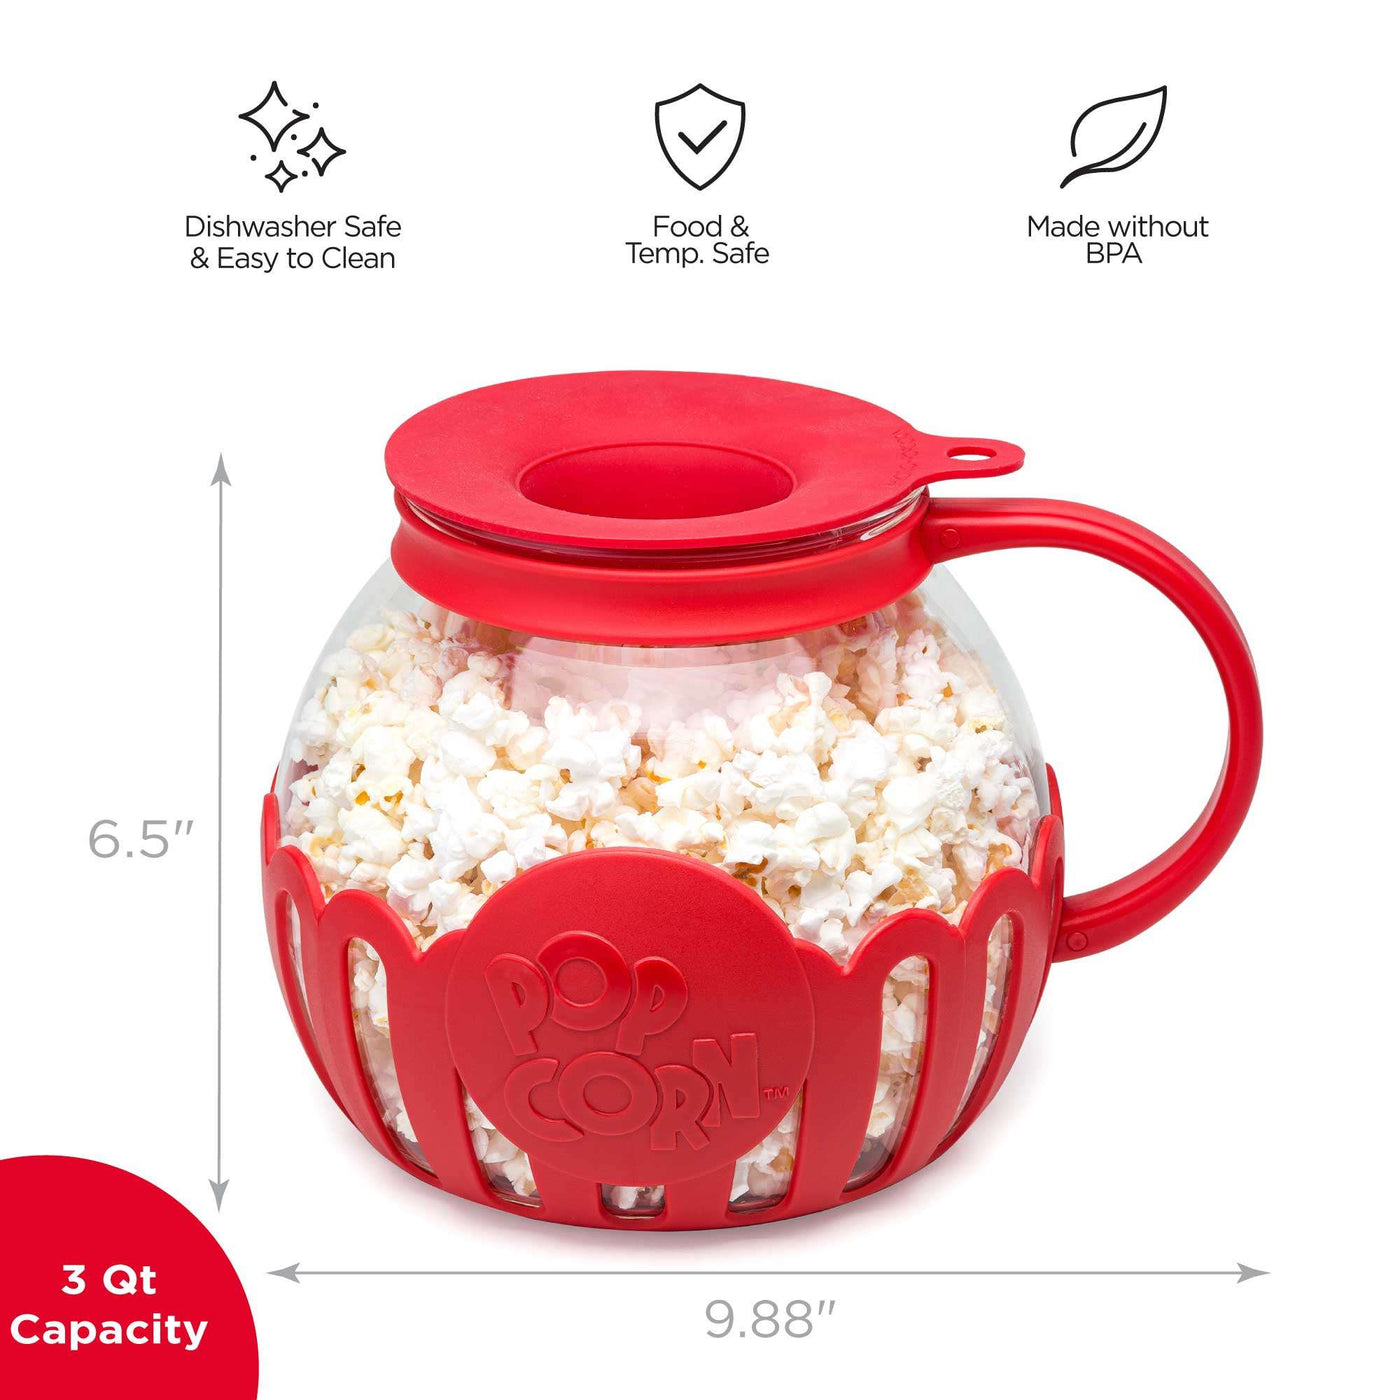 Ecolution Patented Micro-Pop Microwave Popcorn Popper with Temperature Safe  Glass, 3-in-1 Lid Measures Kernels and Melts Butter, Made Without BPA